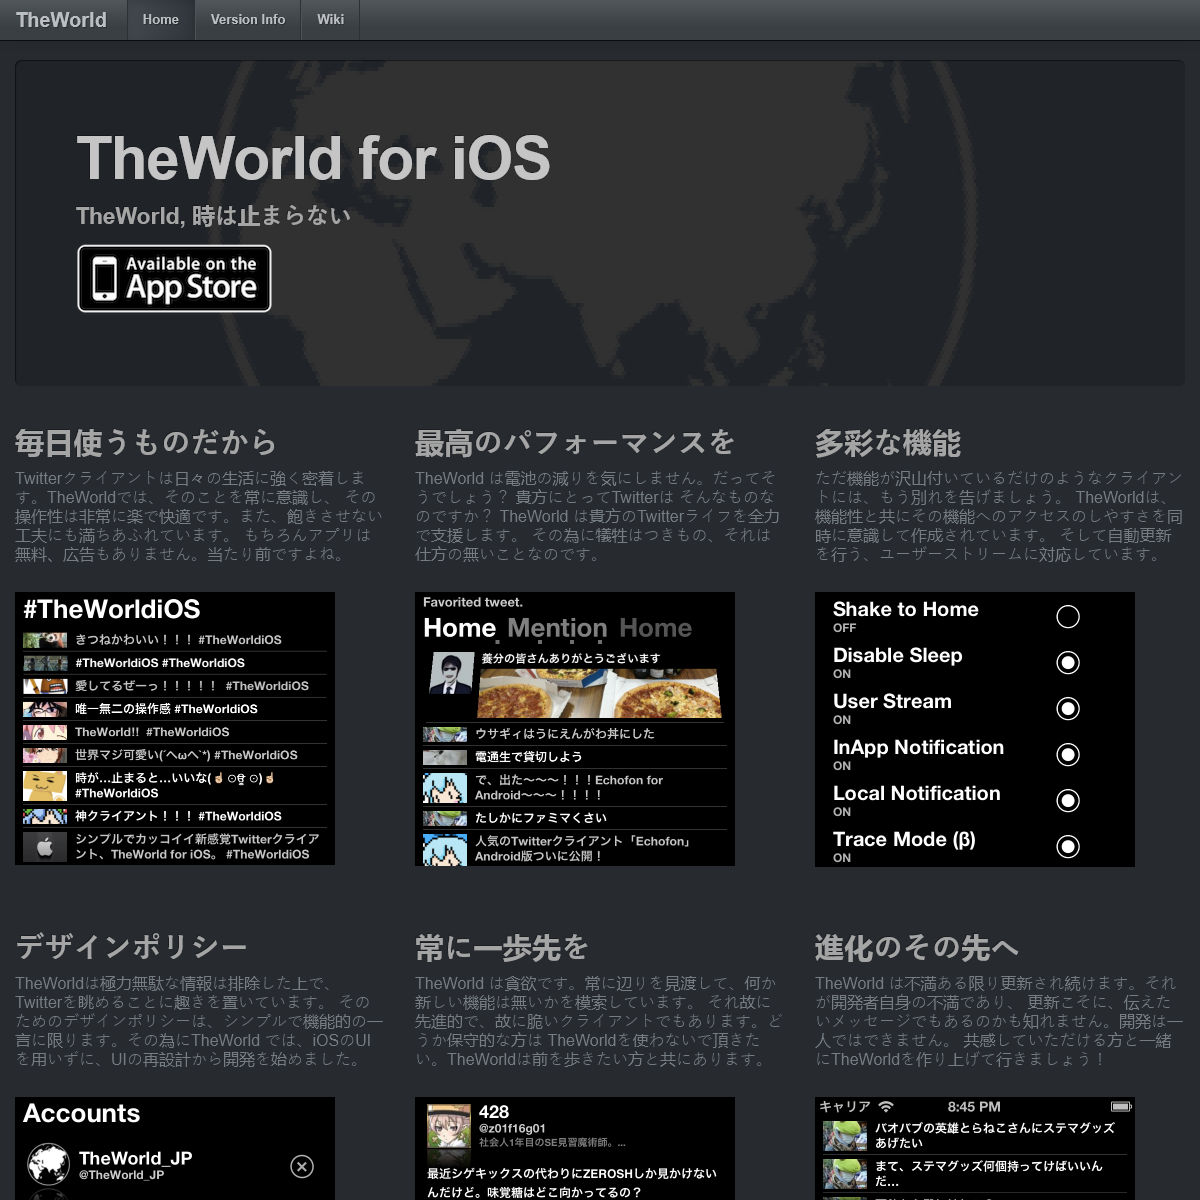 A complete backup of theworld09.com